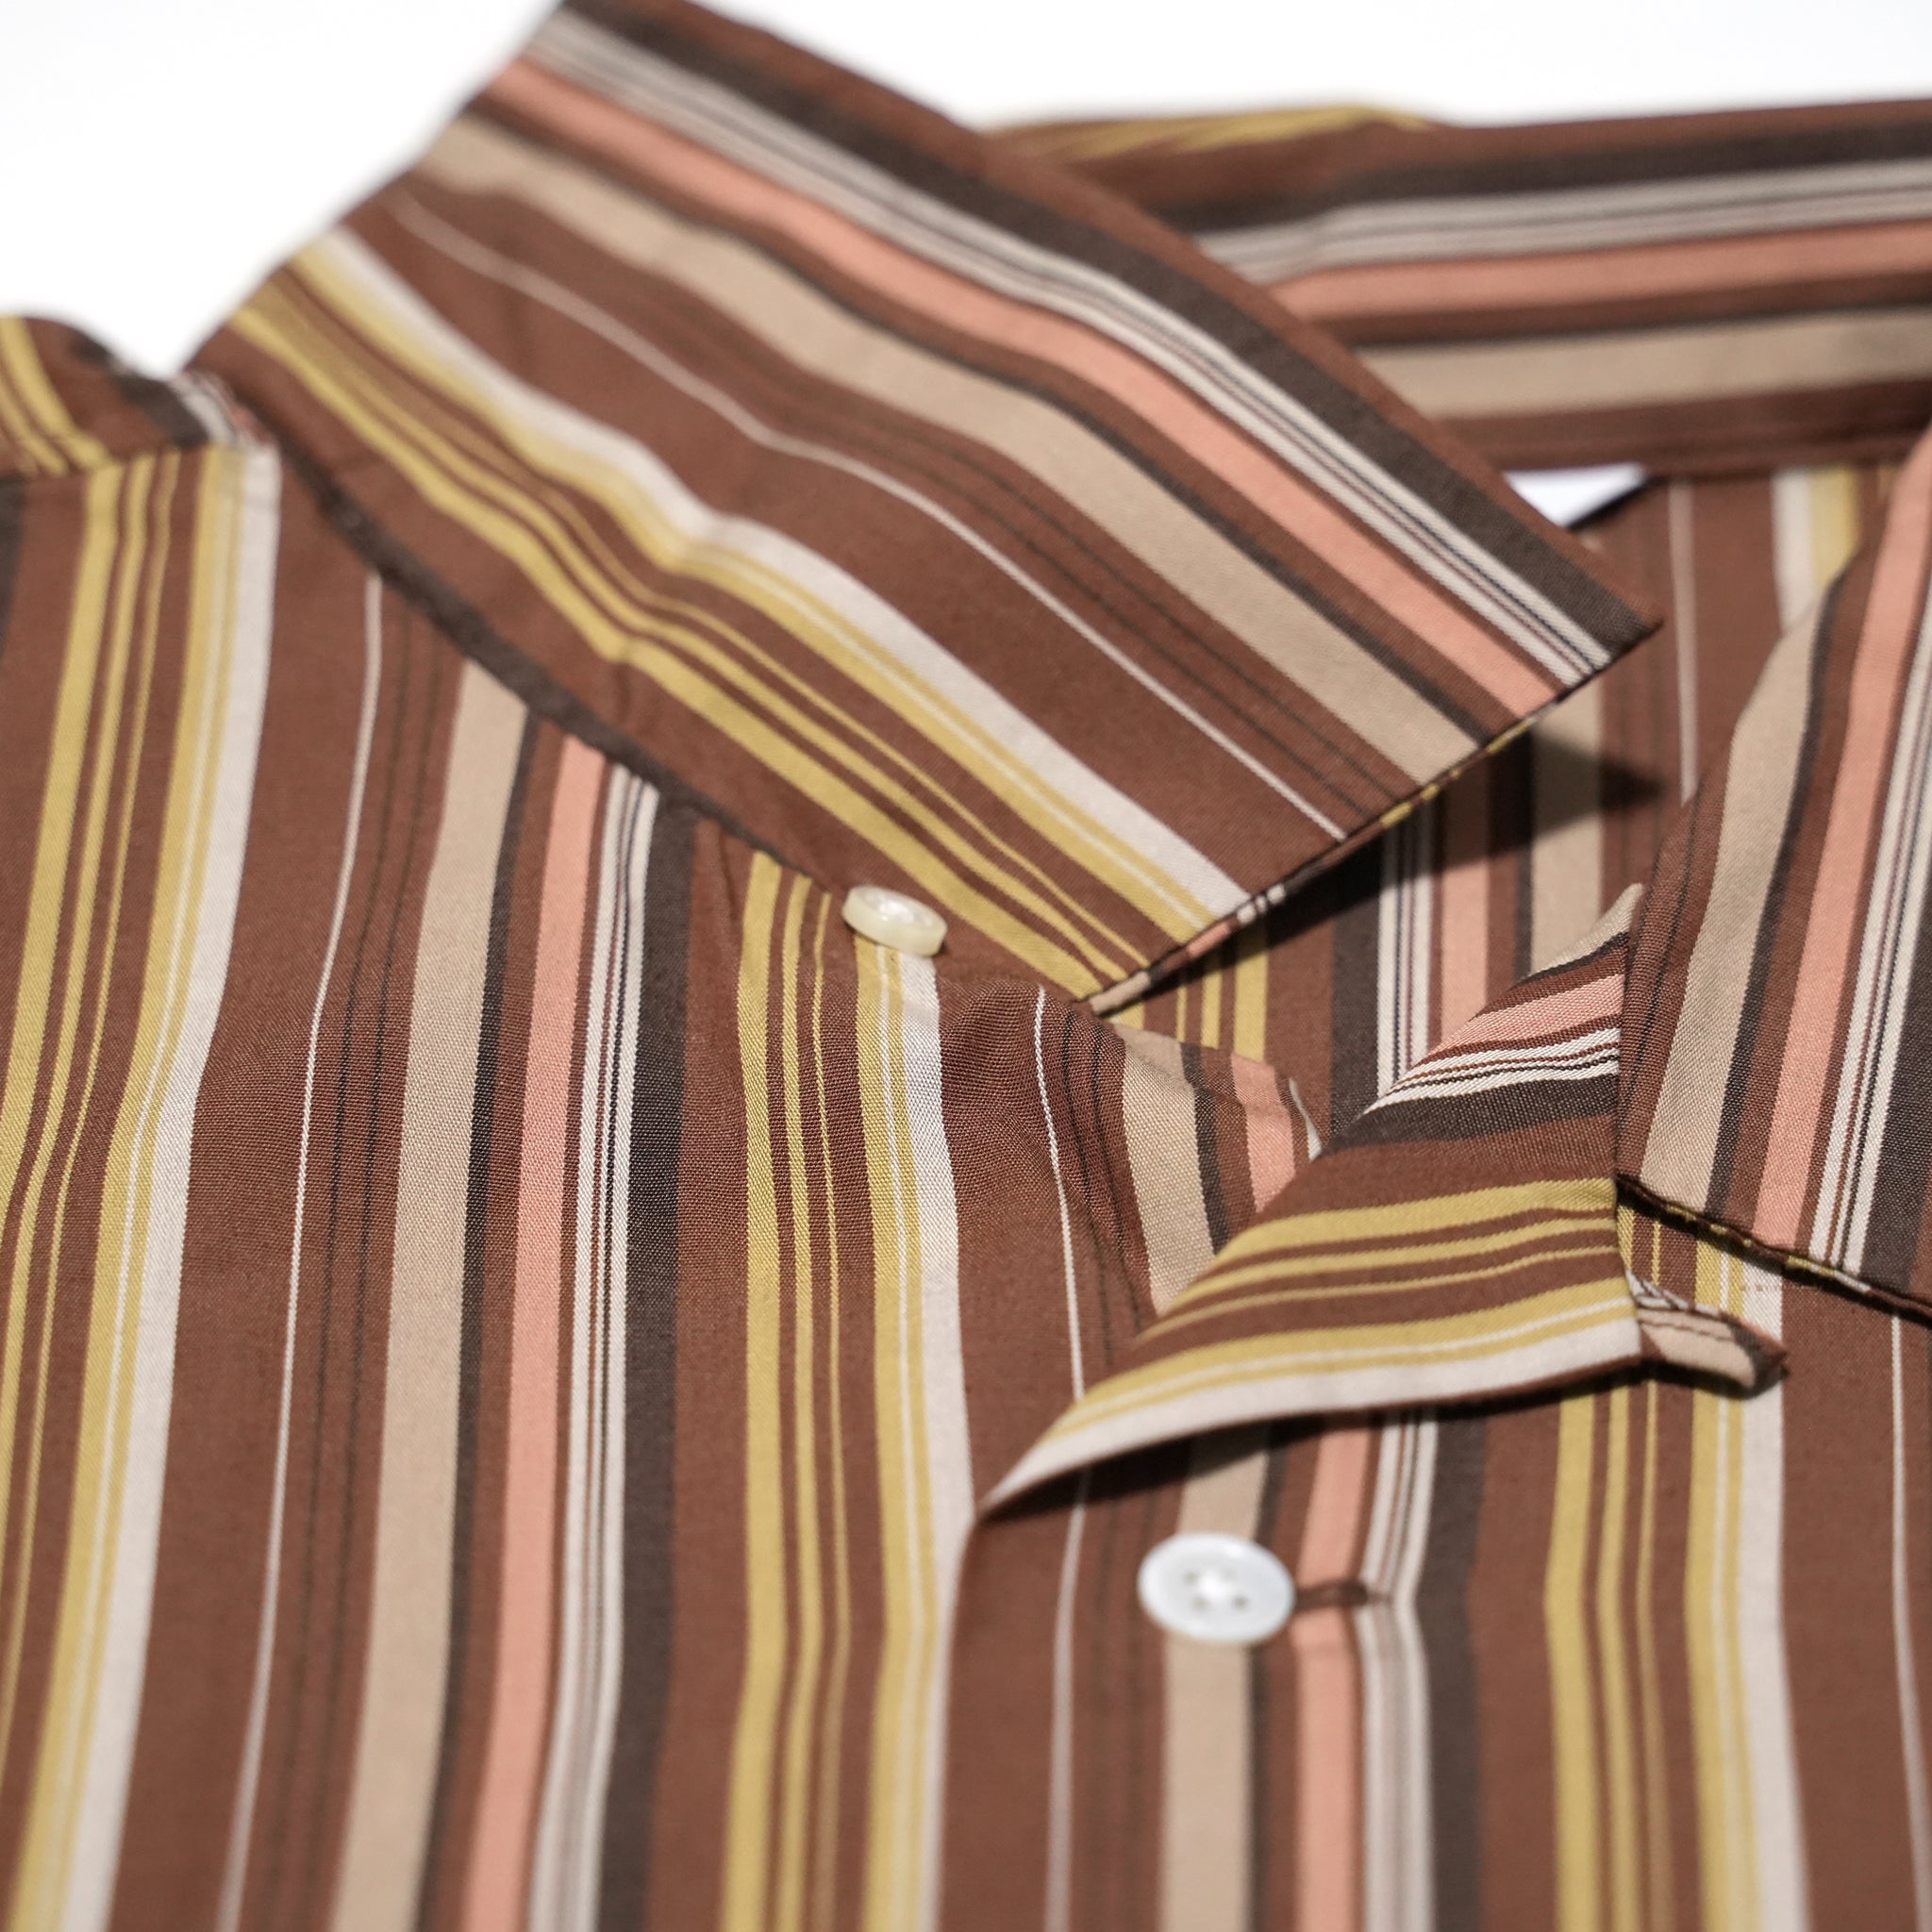 Name:CAMP COLLAR SHIRT | Color:MULTI STRIPE | Size:Regular/Tall【CITYLIGHTS PRODUCTS_シティライツプロダクツ】